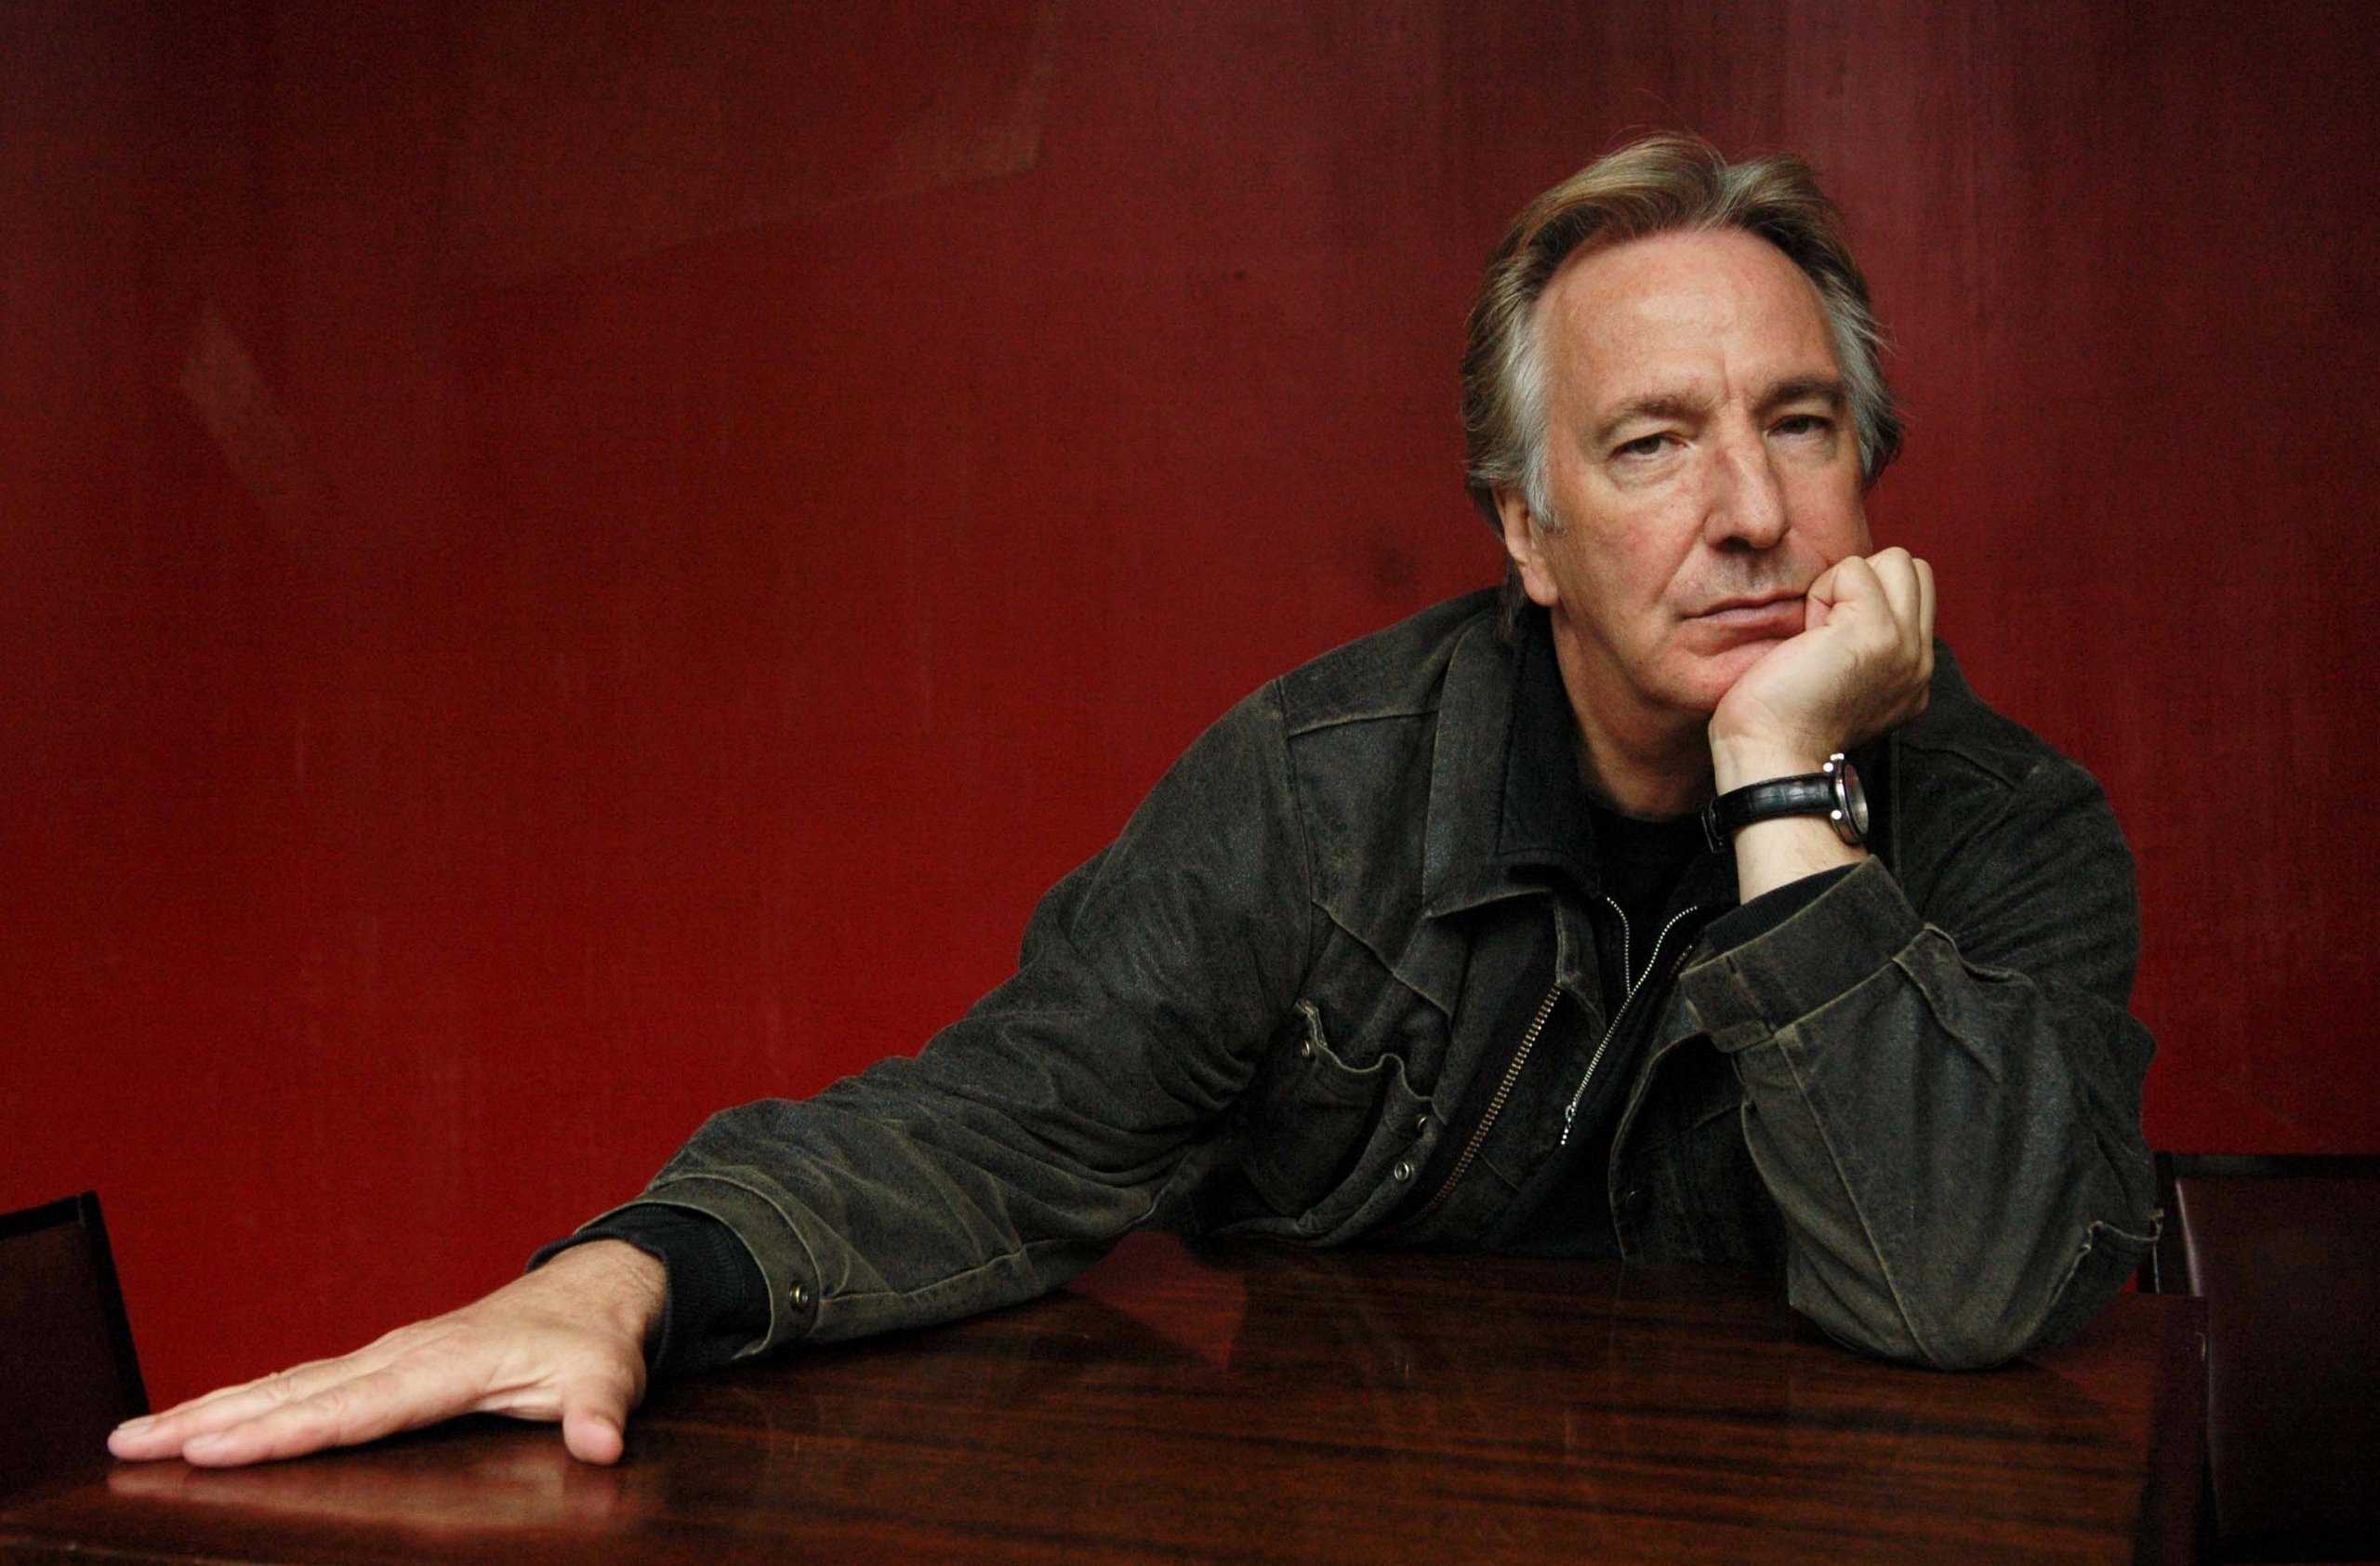 Alan Rickman - Whether you knew him as, the brilliant antagonist Hans Gruber in DIE HARD or as the menacing Professor Snape in the HARRY POTTER films, Rickman always delivered. Known for his serious roles and unique voice, Rickman was always a delight to watch on screen. Rickman passed away January 14, 2016, of pancreatic cancer. 